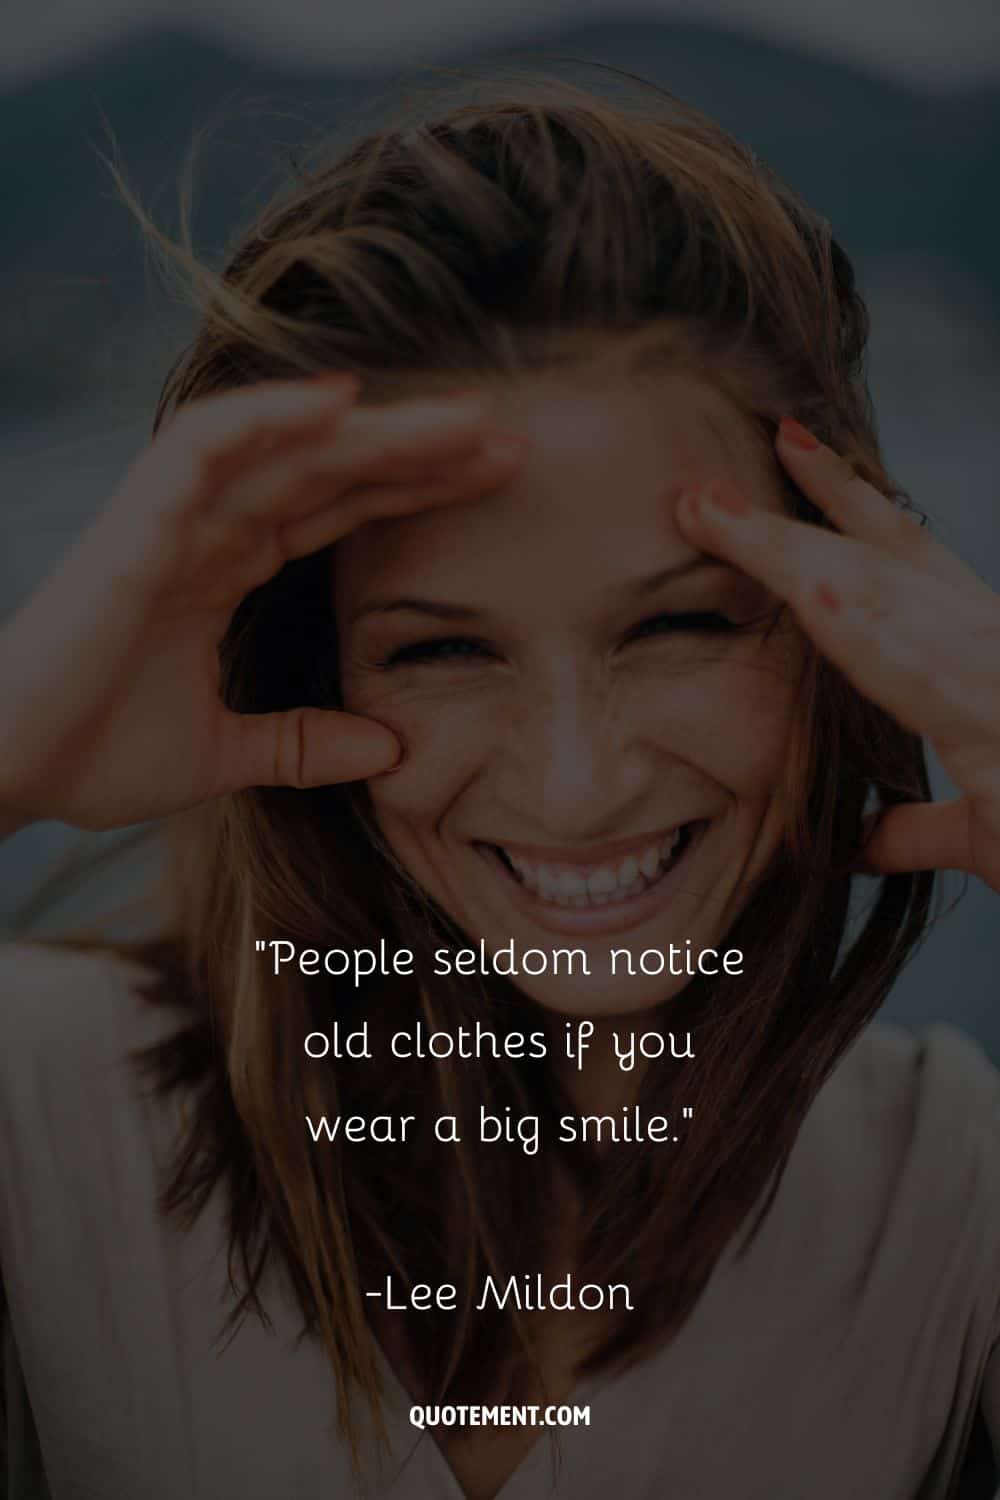 girl with cute smile lines representing smile photo caption